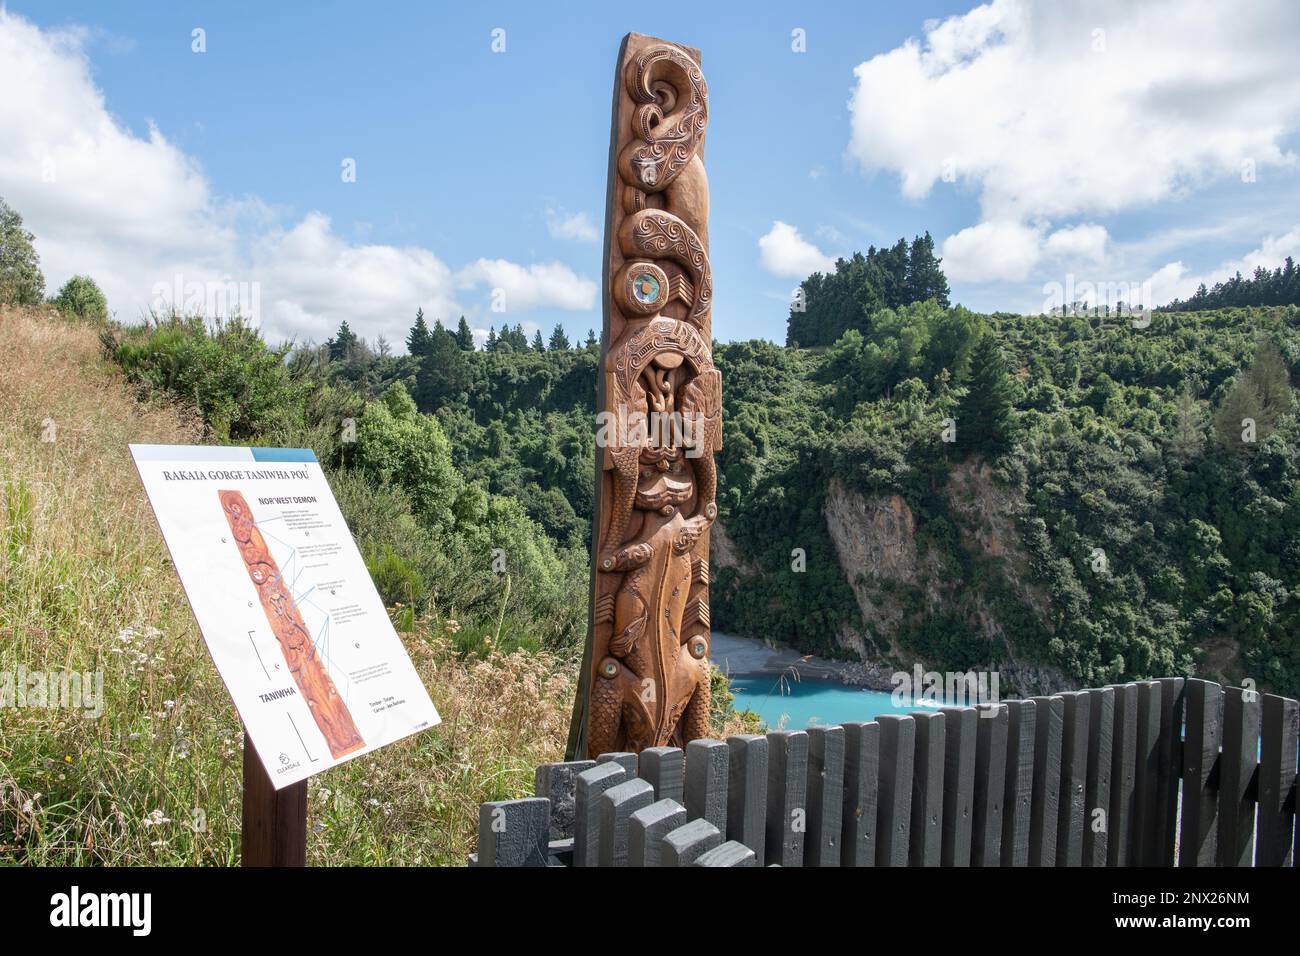 A wooden pou carving of a Taniwha from Maori mythology next to the Rakaia River and Gorge in Aotearoa New Zealand. Stock Photo